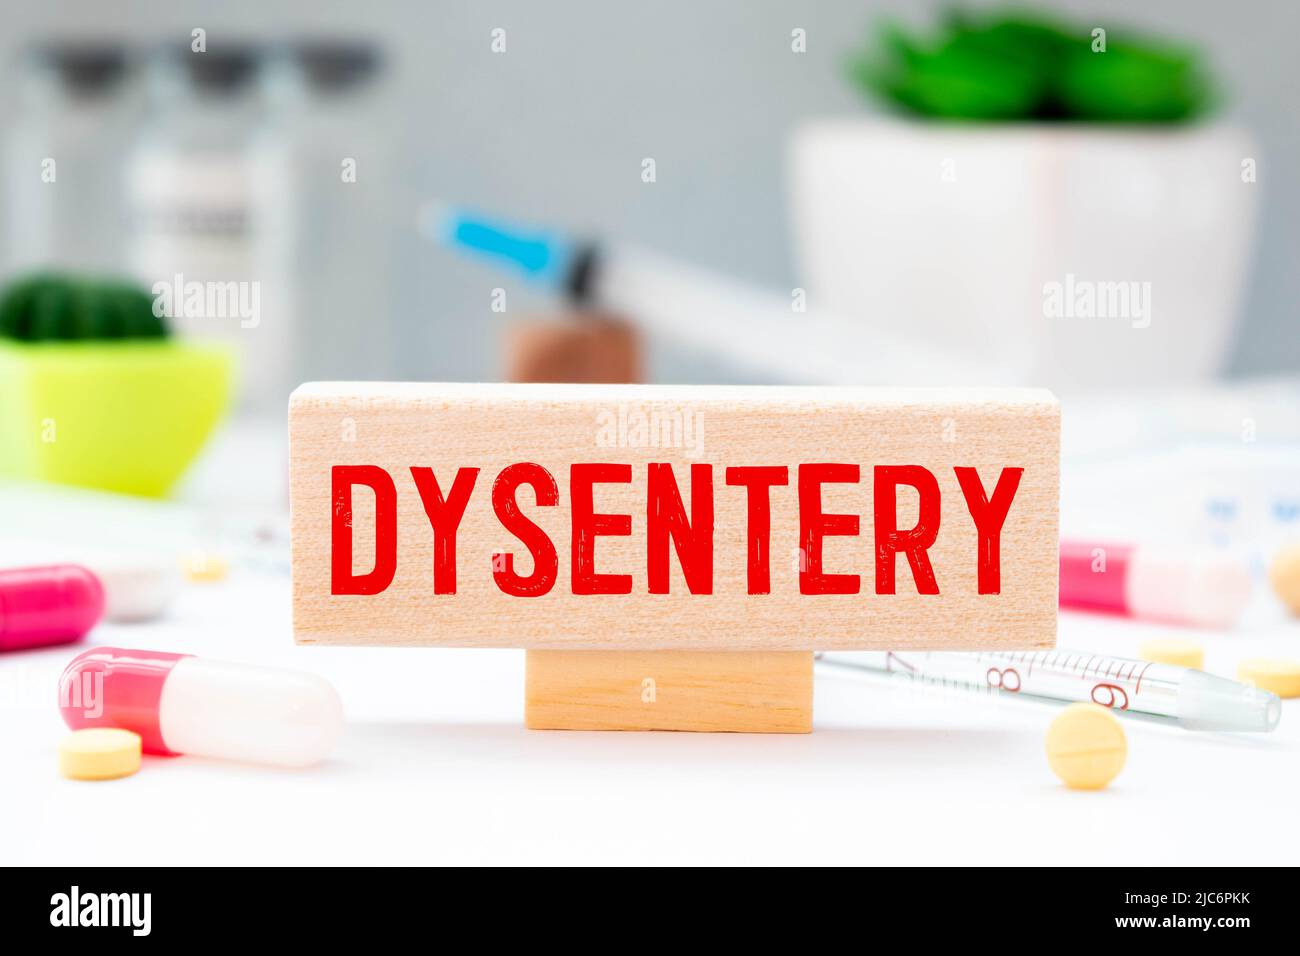 Dysentery, word cube with background Stock Photo